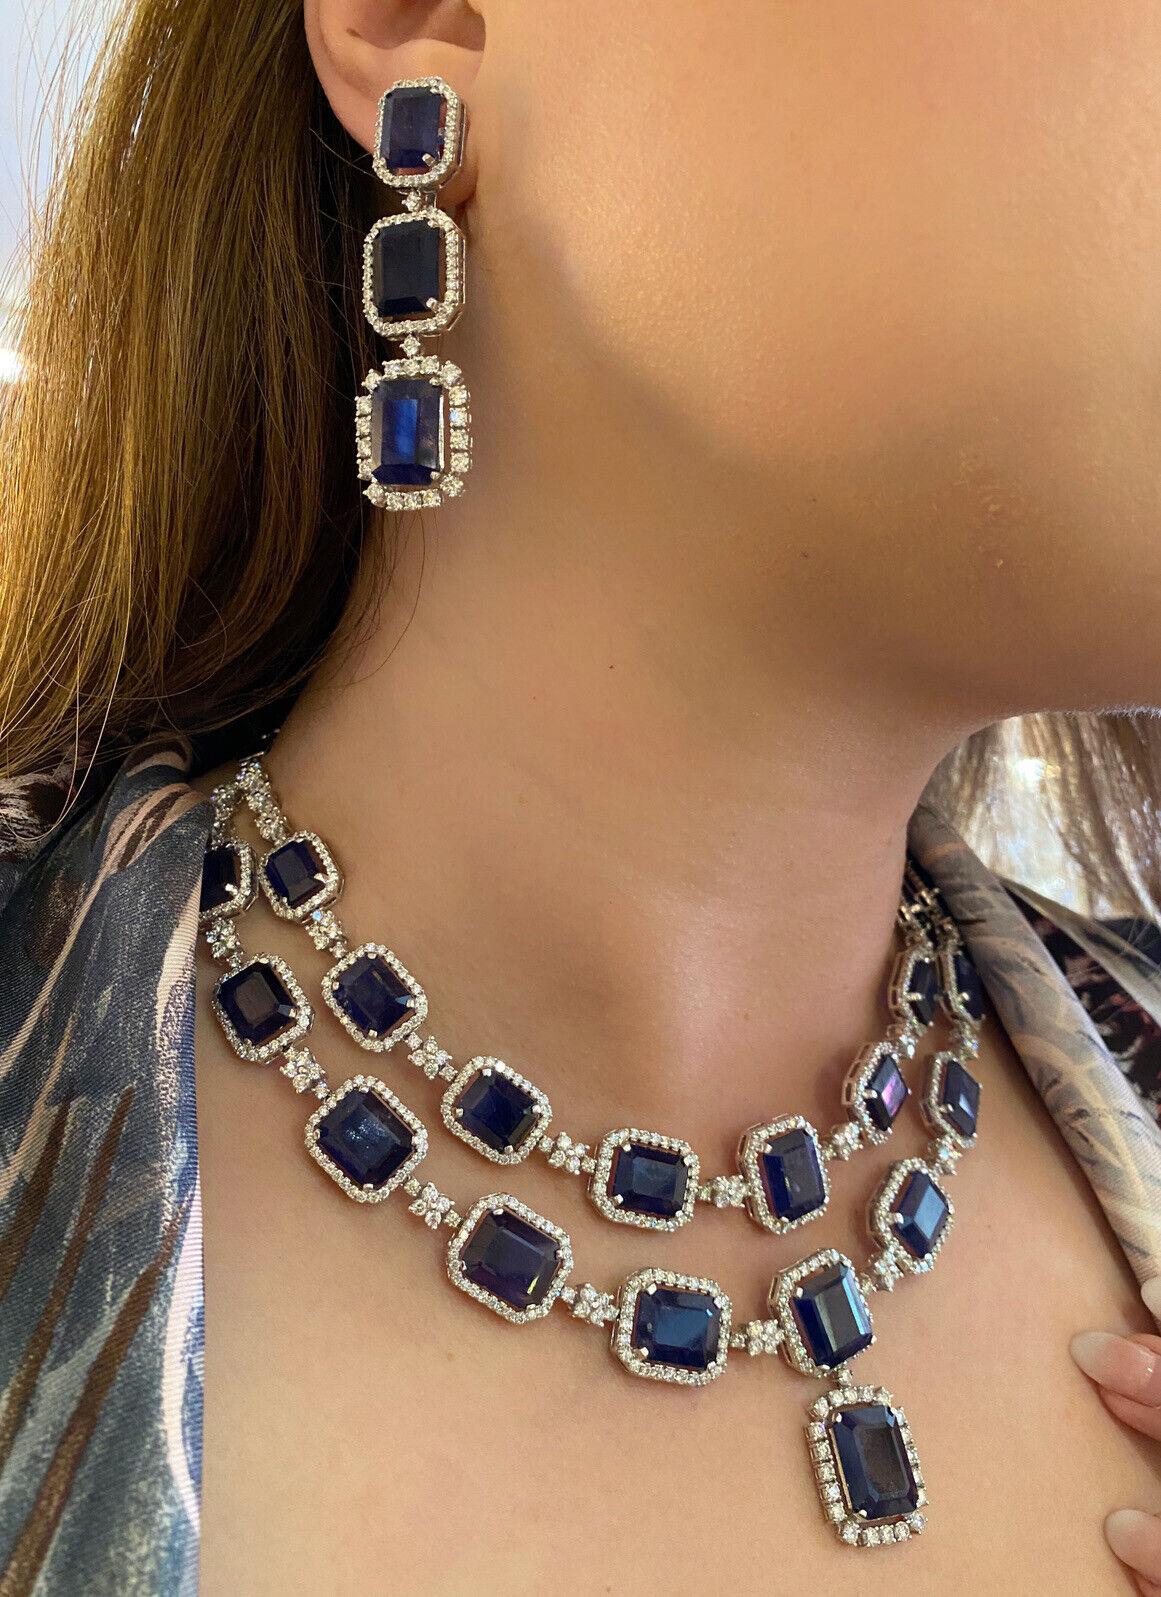 Sapphire and Diamond Necklace and Earrings in 18k White Gold
Features
21 Emerald Cut Natural Blue Sapphires in the Necklace set in two rows
and 6 Emerald Cut Natural Sapphires in the Earrings weighing 93.72 carats in total

Sapphires do not have